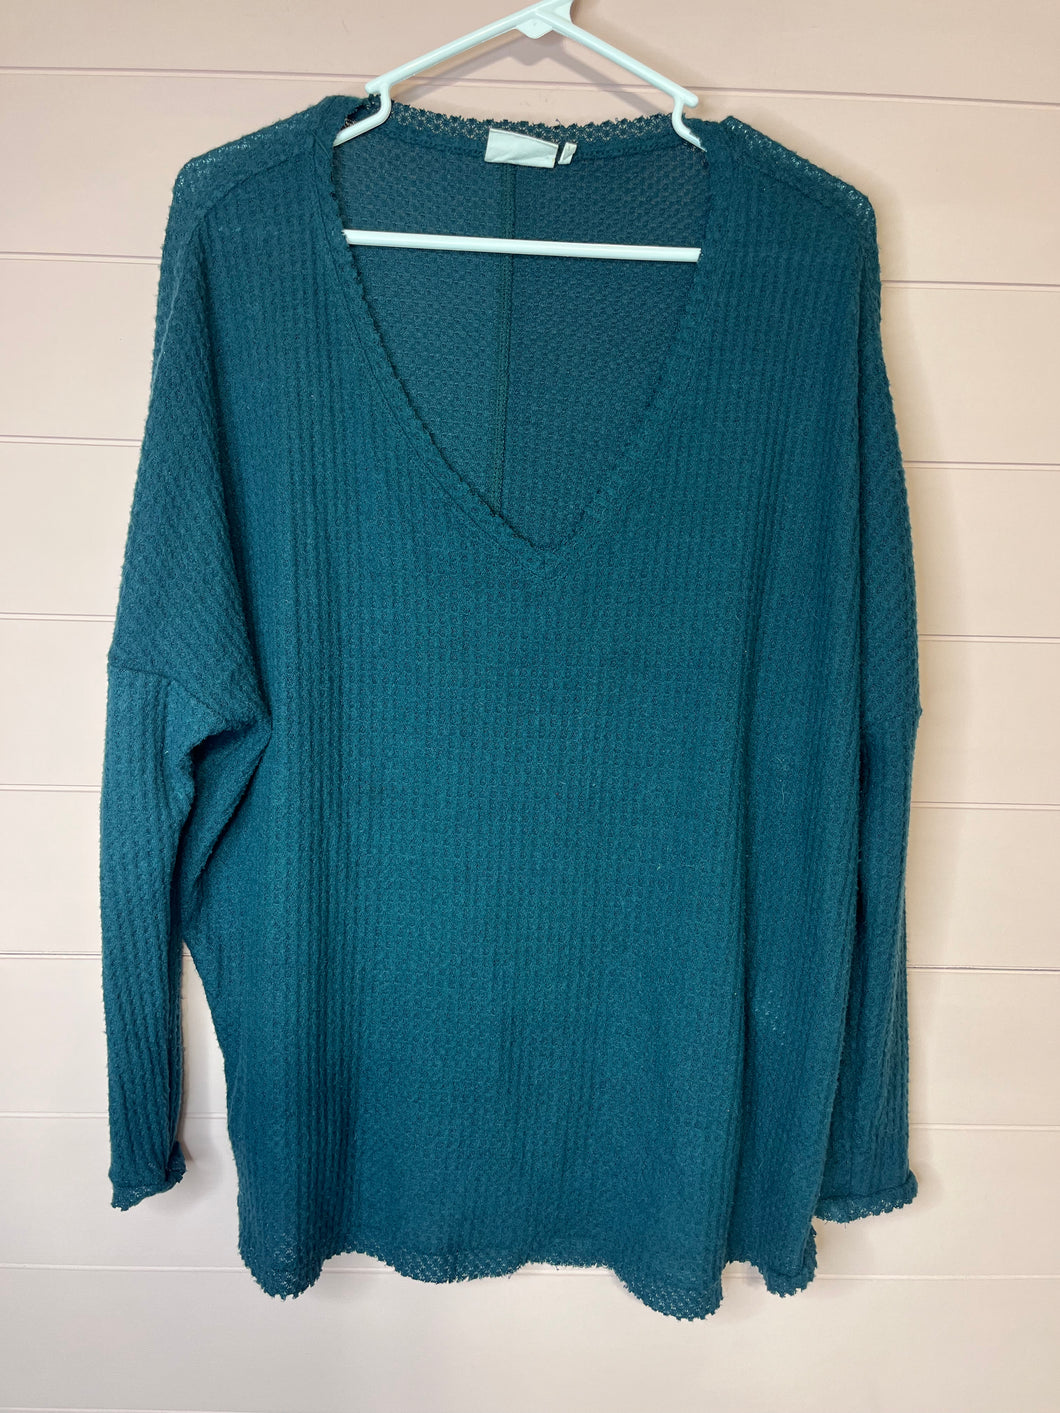 Small Urban Outfitters Out From Under Dark Teal Waffle Knit Top